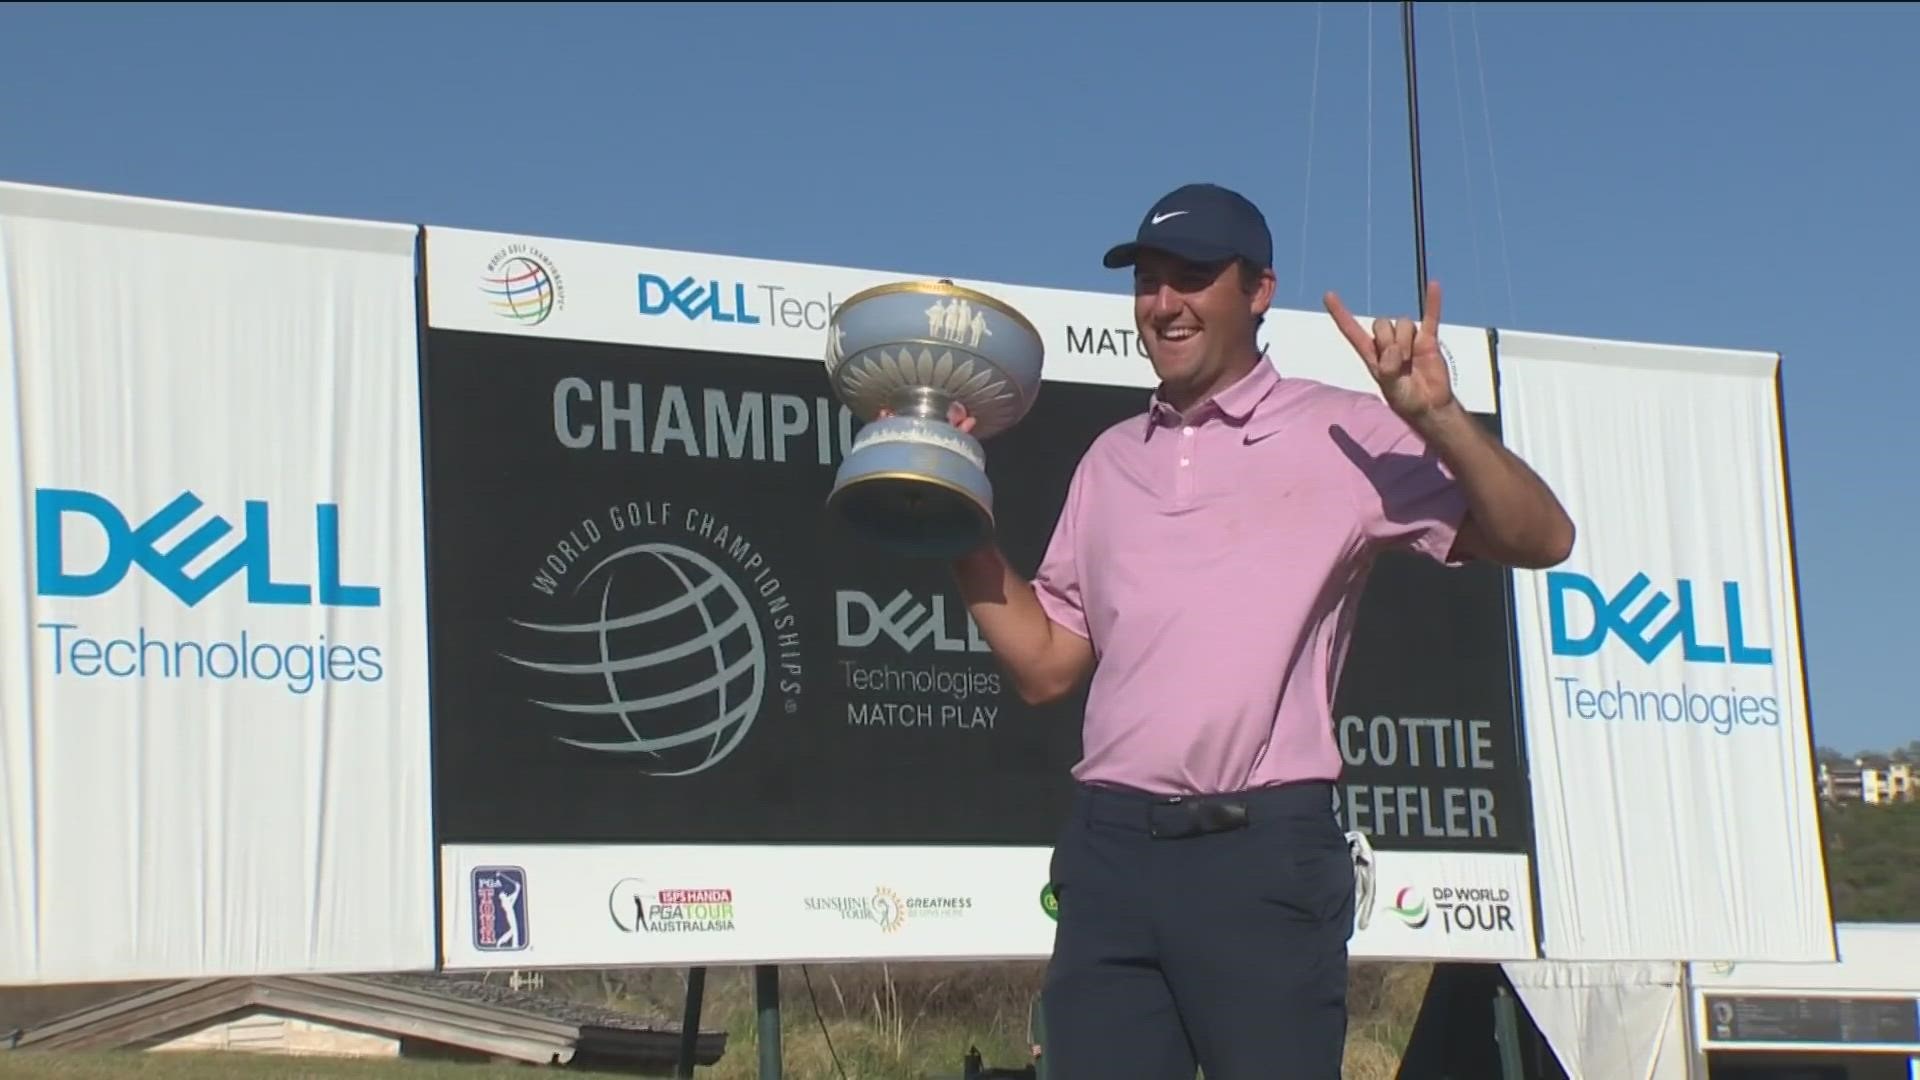 KVUE spoke with the tournament's director, who said the decision was not a financial one, but instead had to do with the layout of the 2024 calendar.